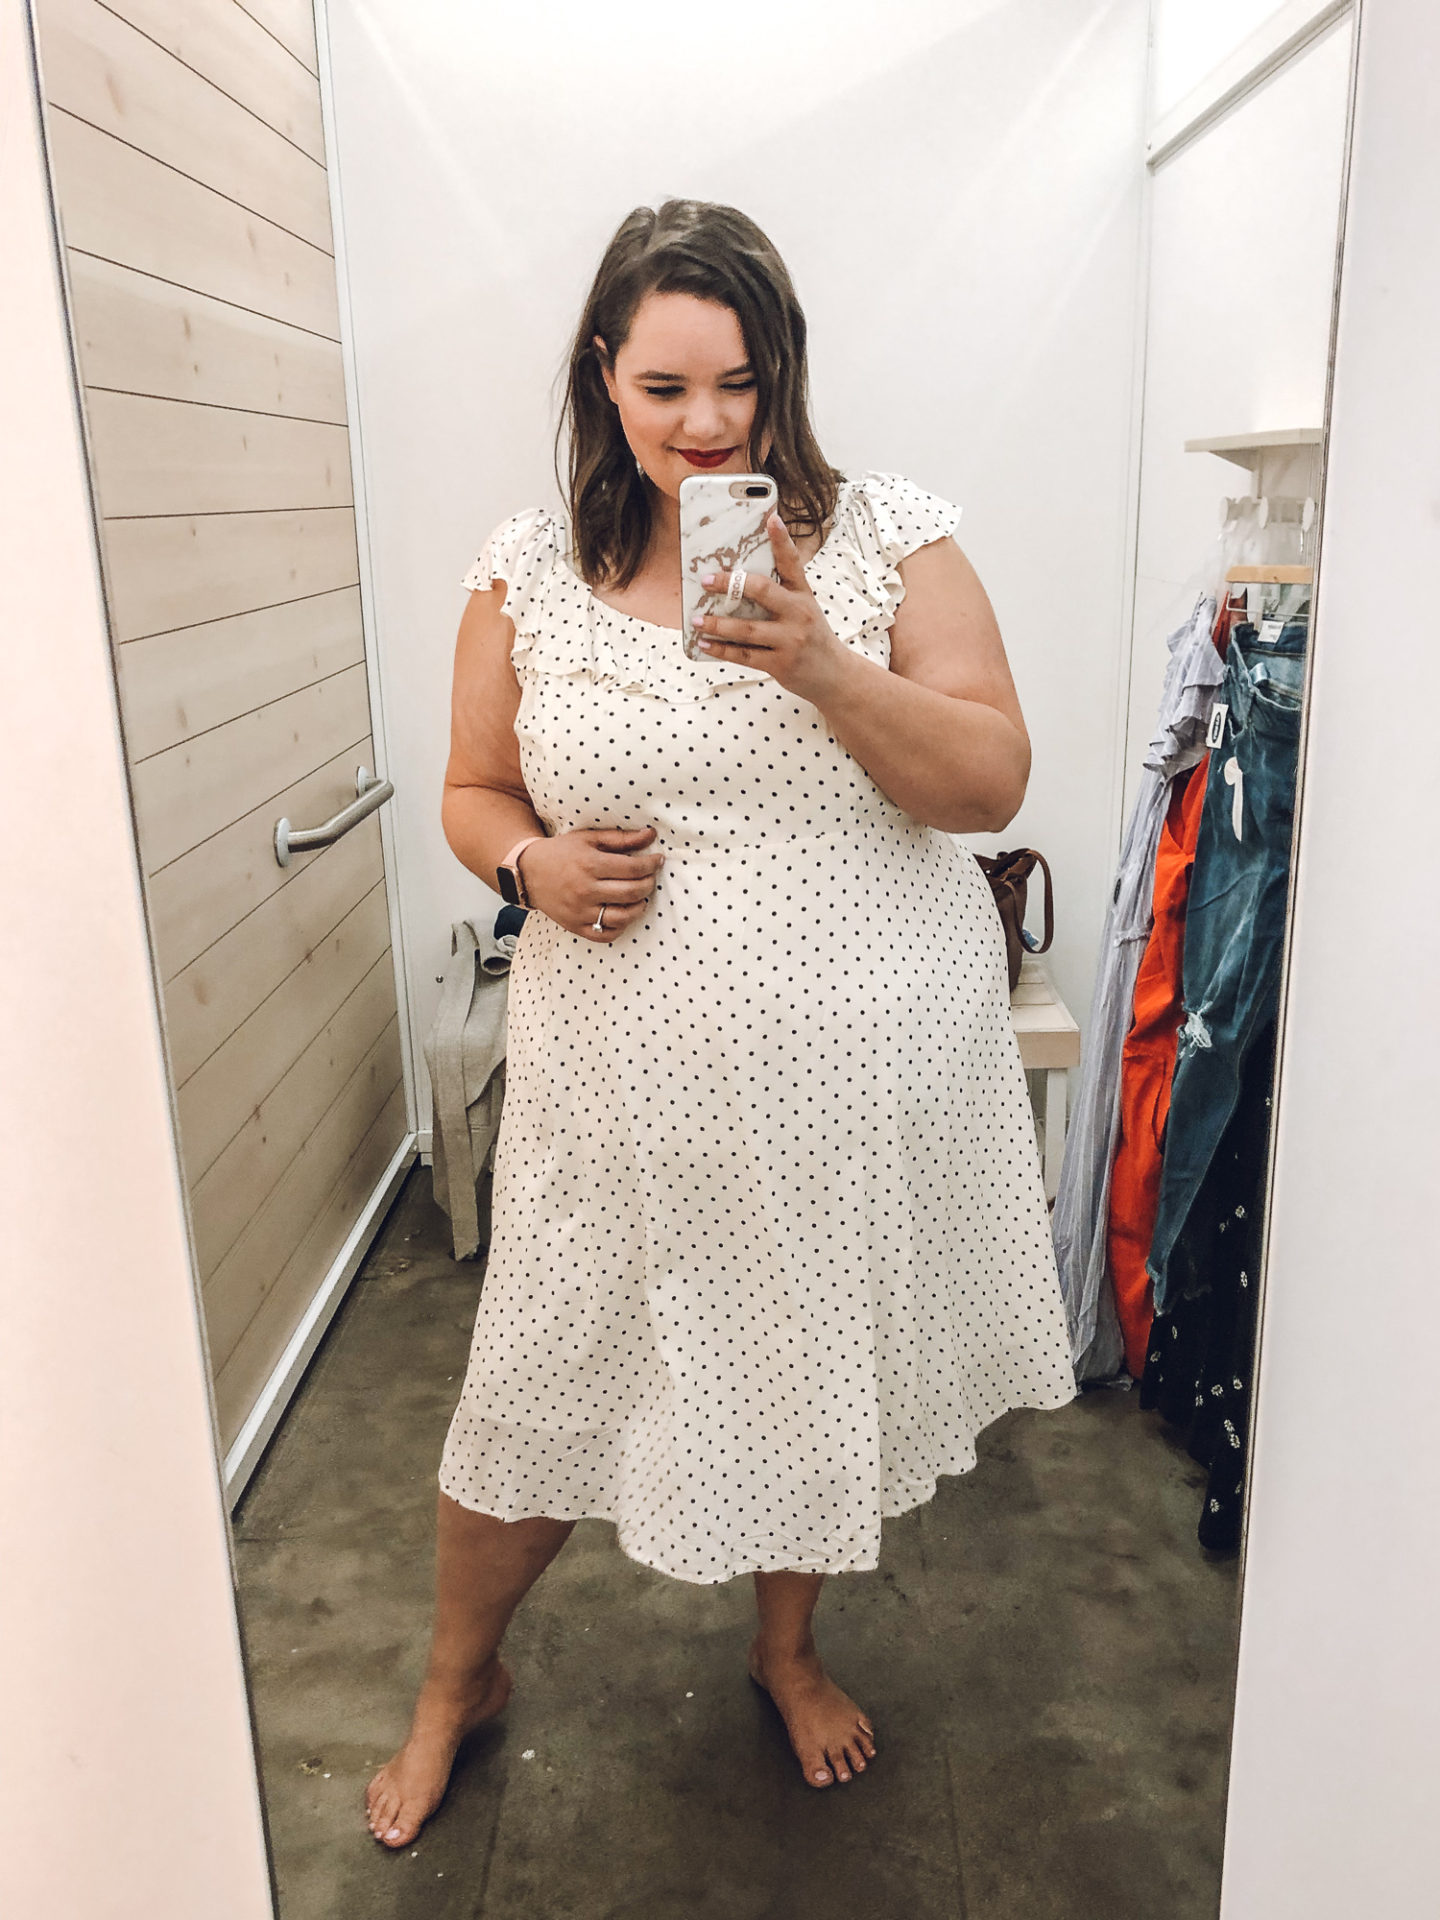 OLD NAVY TRY ON APRIL